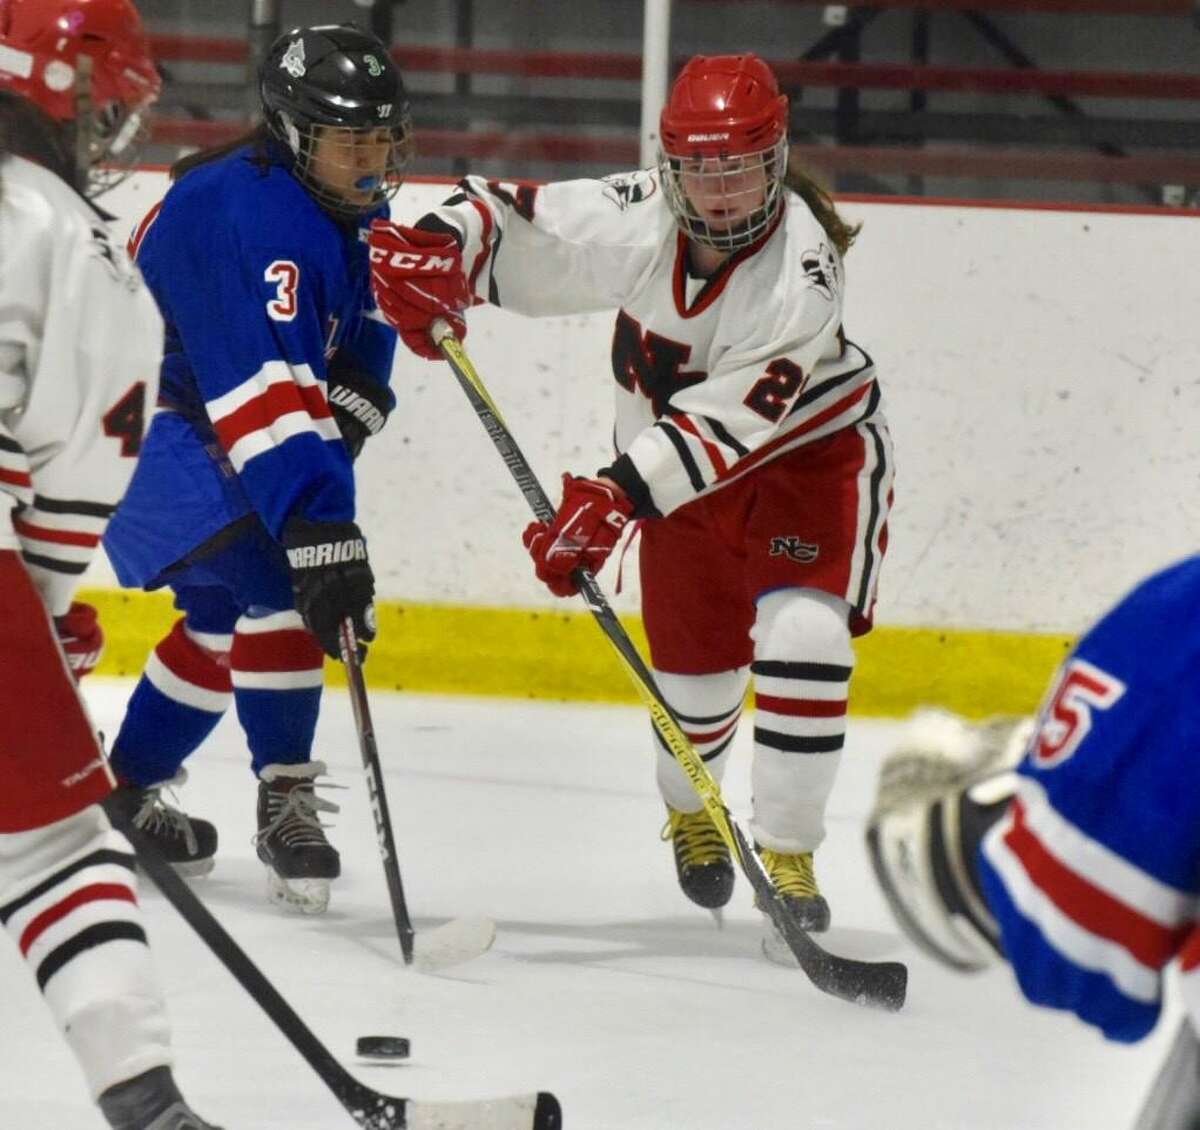 New Canaan’s Maddie Kloud (27) sends a pass to a teammate during the Rams’ game against Fairfield in the FCIAC girls ice hockey semifinals at the Darien Ice House on Wednesday, Feb. 26, 2020.